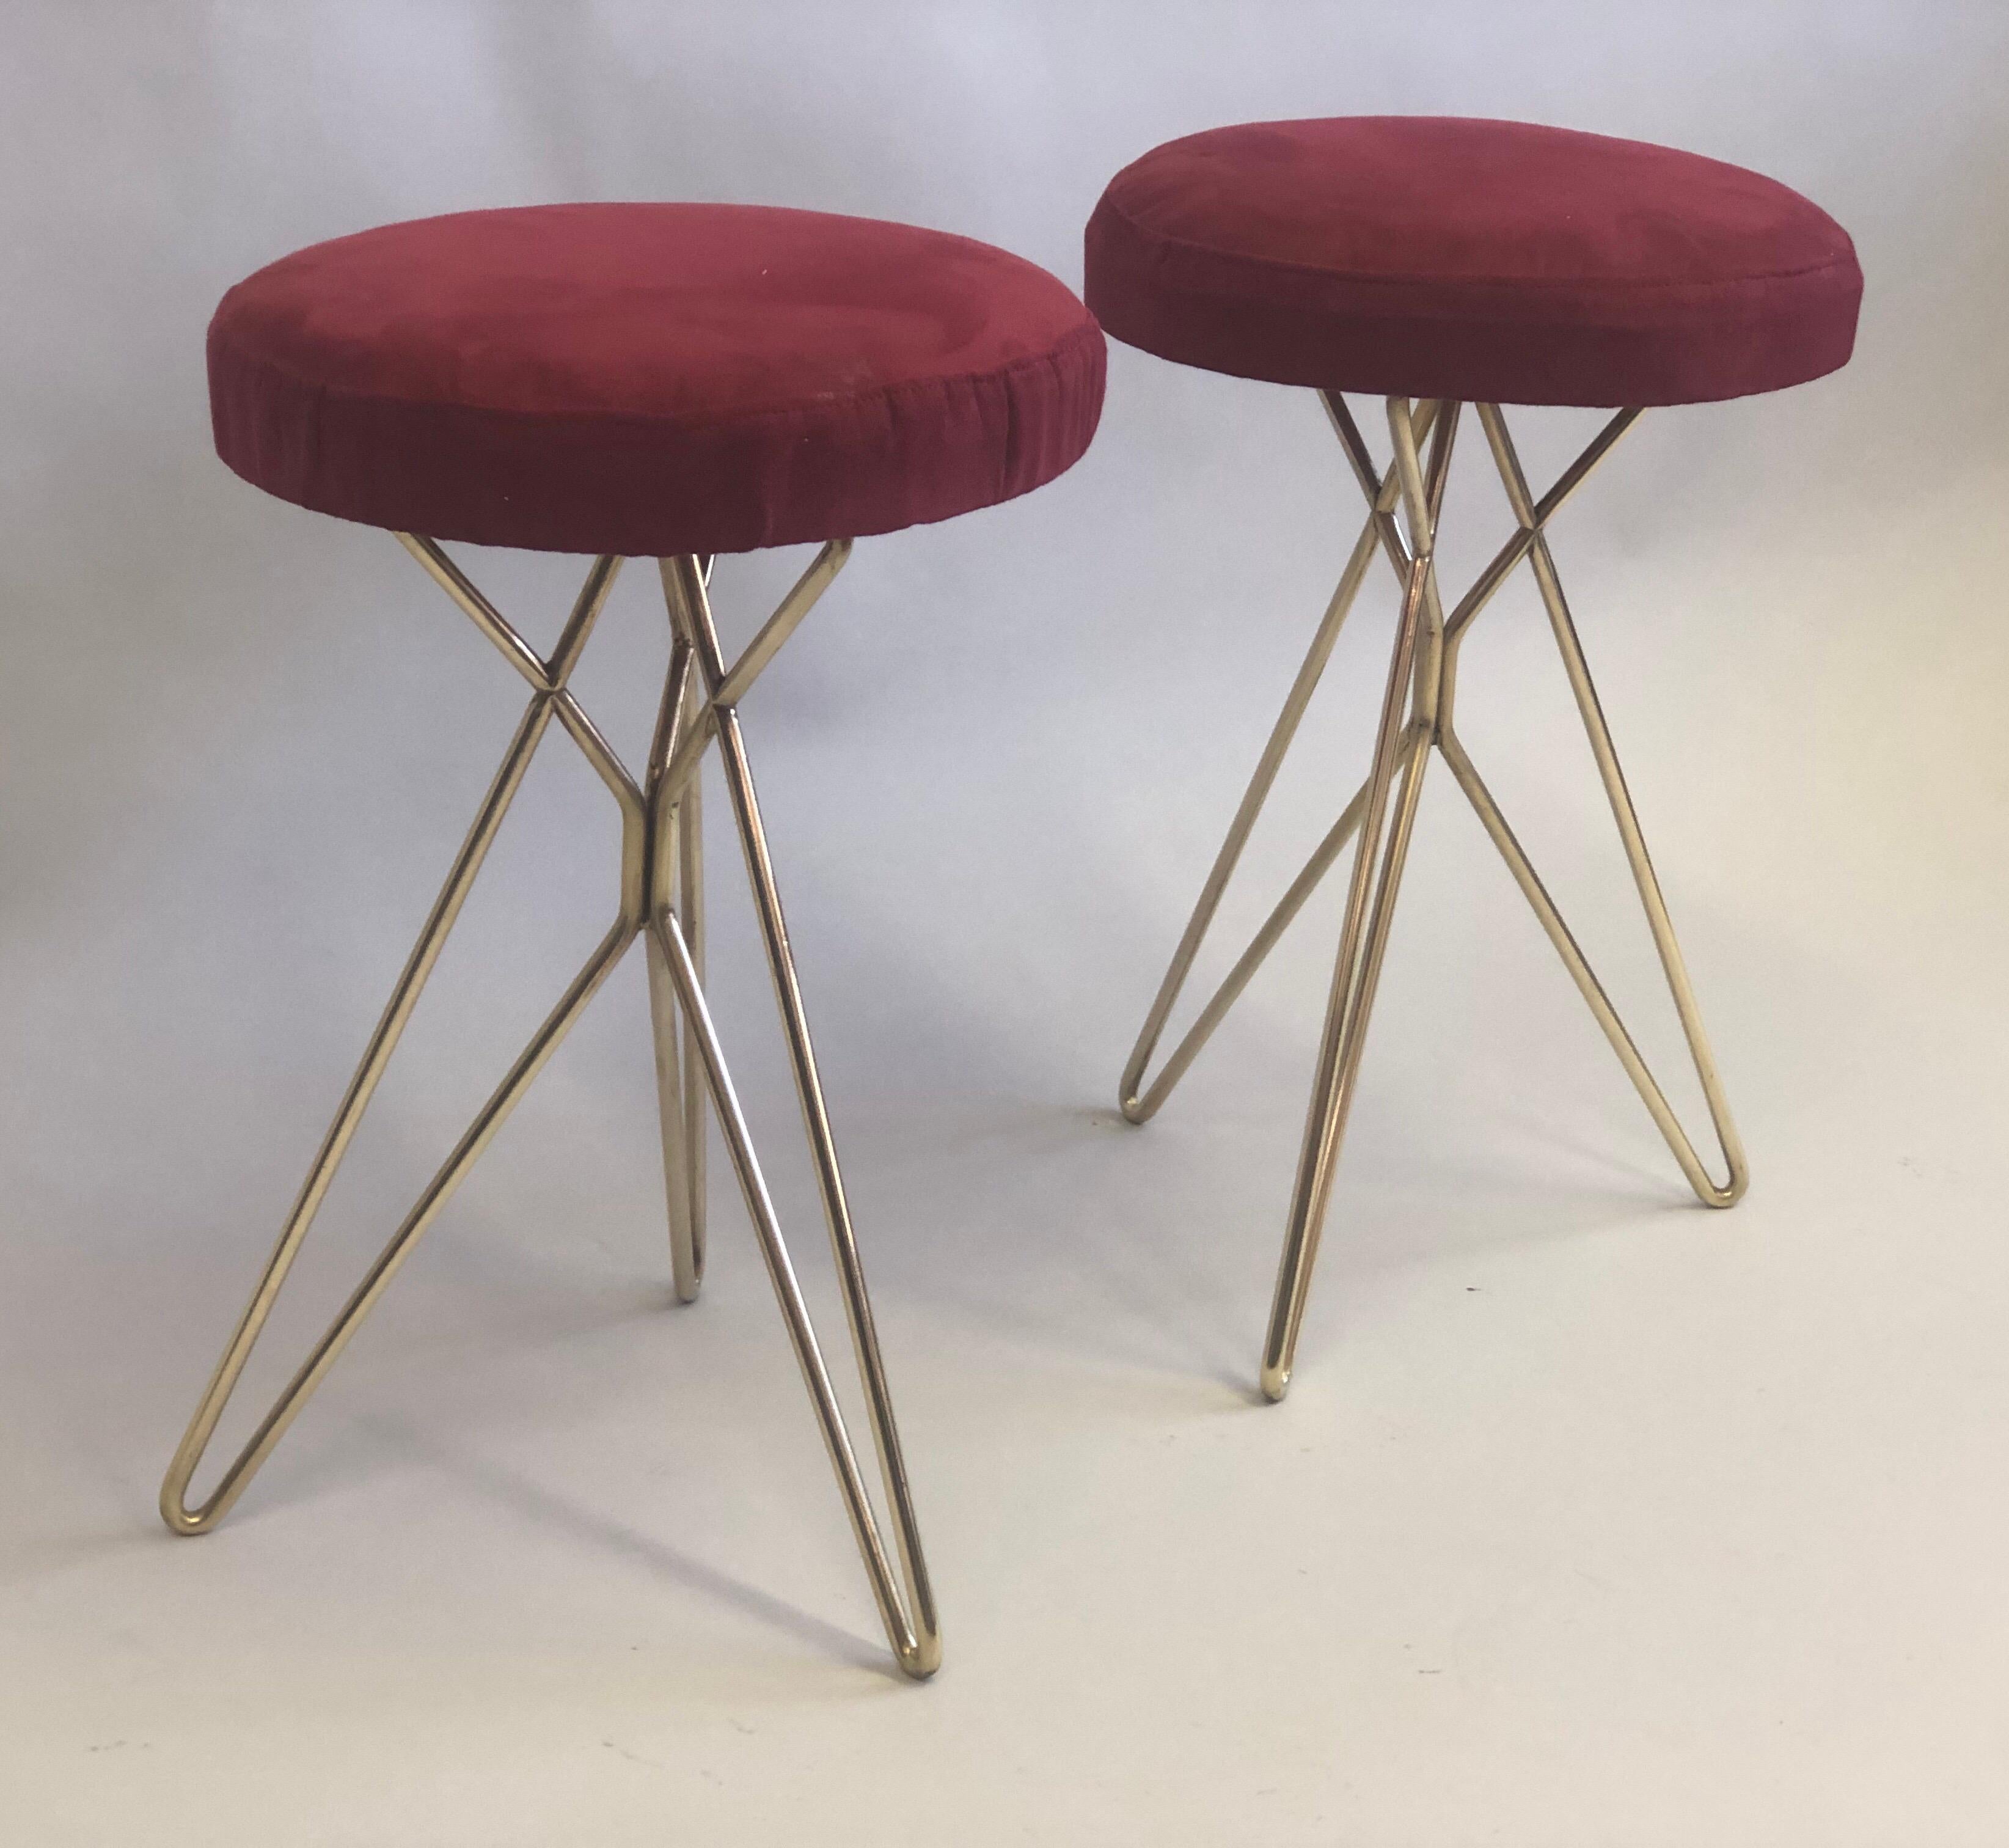 Pair of Italian Midcentury Brass Stools Attributed to Ico Parisi, 1952 In Good Condition For Sale In New York, NY